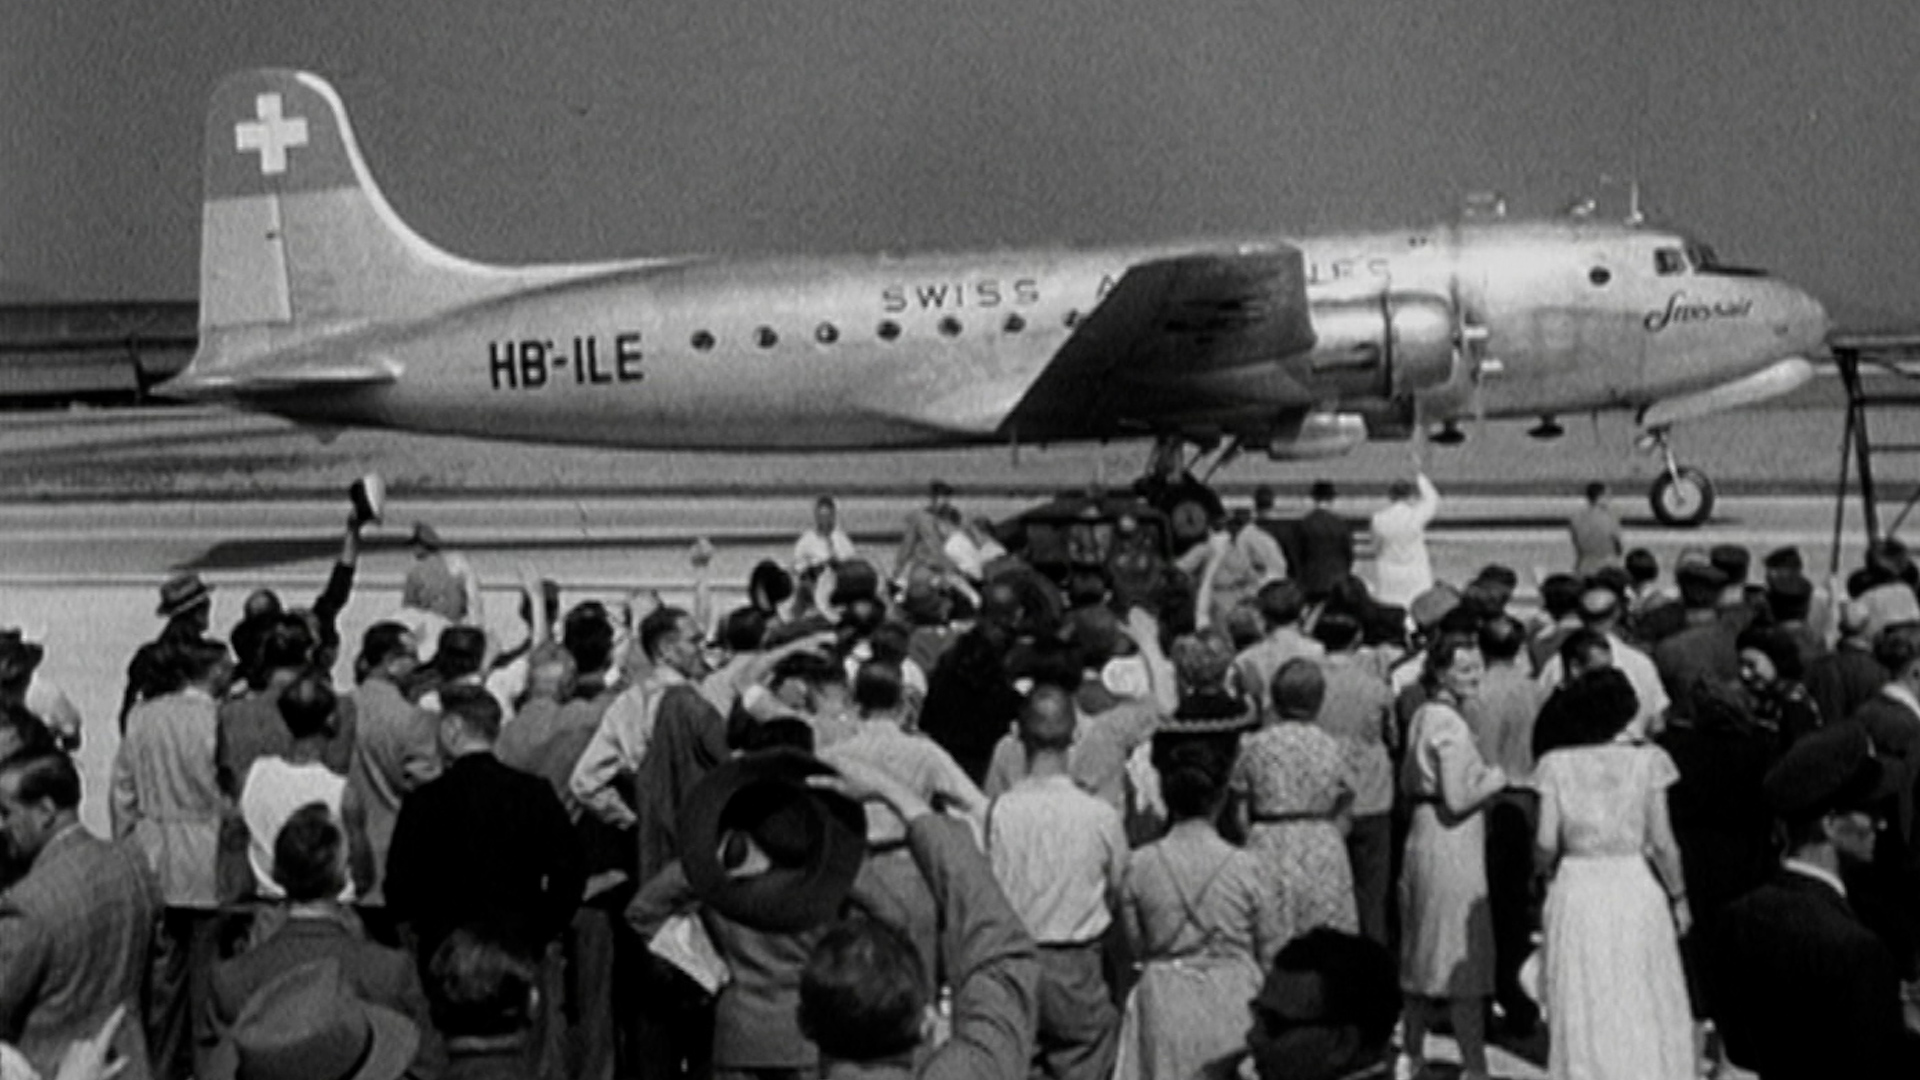 On June 14, 1948, a Swissair Douglas DC-4 was the first aircraft to take off from Zurich Airport to London